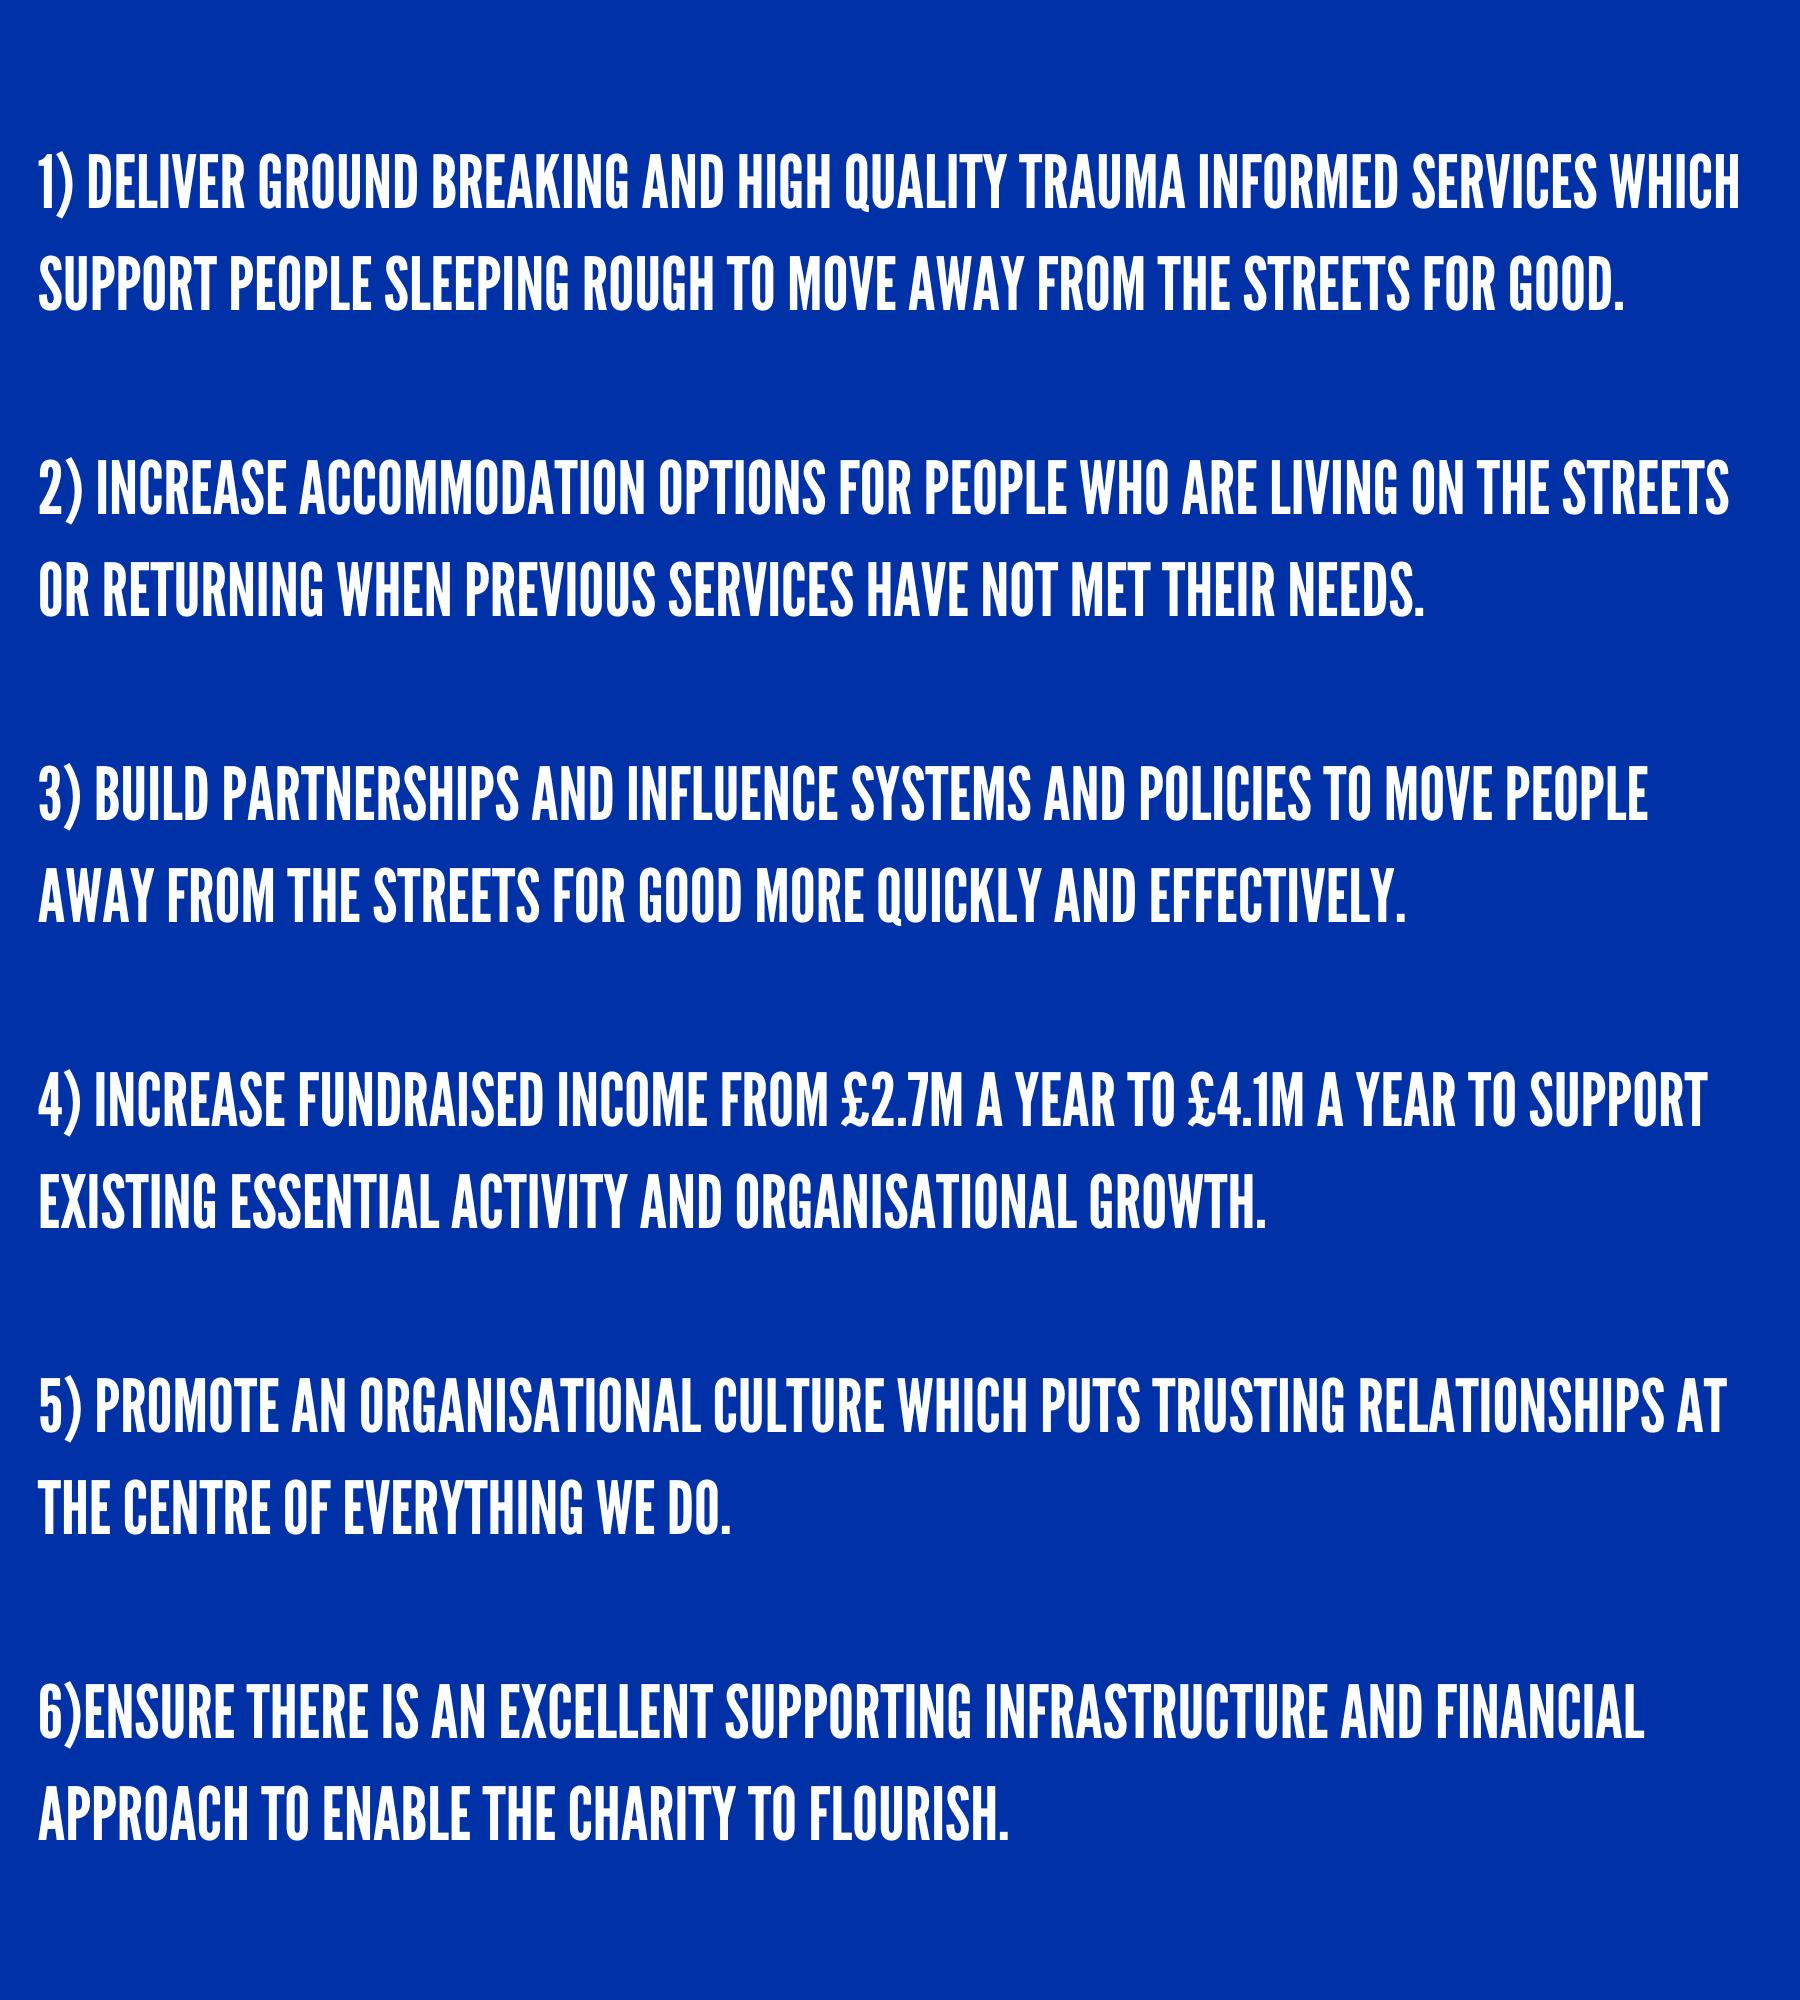 1) Deliver ground breaking and high quality trauma informed services which support people sleeping rough to move away from the streets for good.

2) Increase accommodation options for people who are living on the streets or returning when previous services have not met their needs.

3) Build partnerships and influence systems and policies to move people away from the streets for good more quickly and effectively.

4) Increase fundraised income from £2.7m a year to £4.1m a year to support existing essential activity and organisational growth. 

5) Promote an organisational culture which puts trusting relationships at the centre of everything we do.

6)Ensure there is an excellent supporting infrastructure and financial approach to enable the charity to flourish.